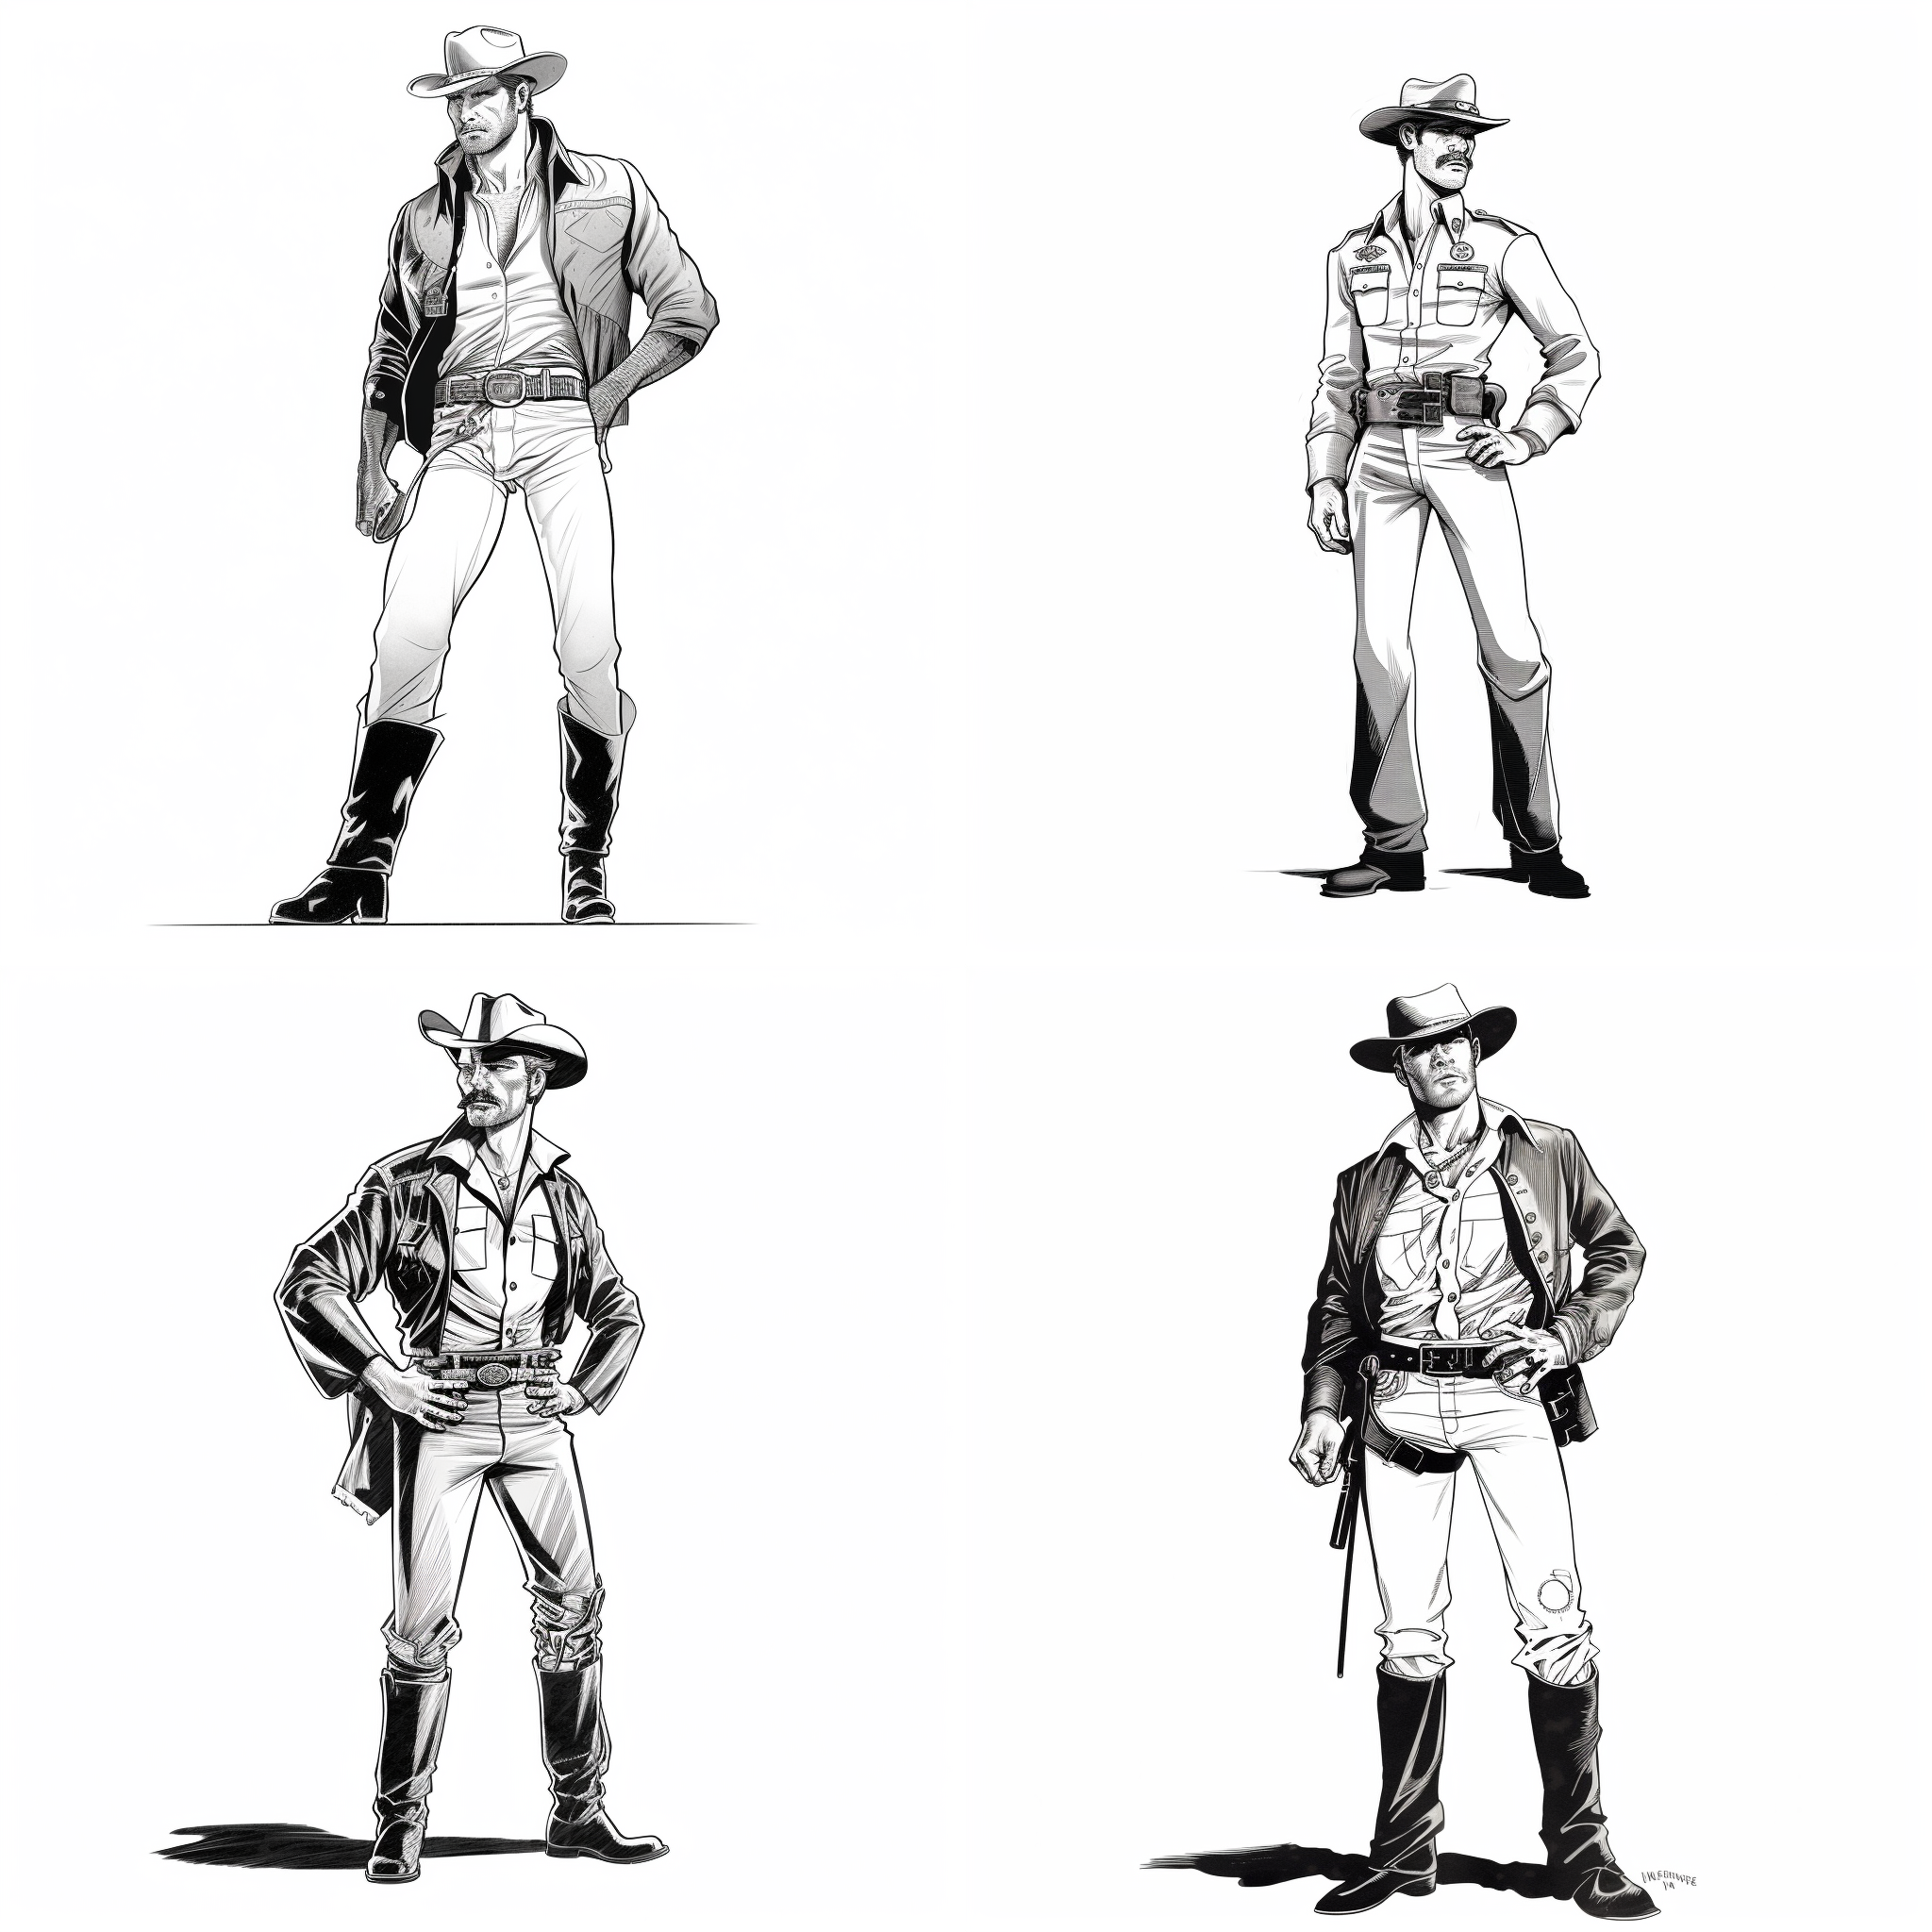 andrewalbin_a_full_body_profile_shot_of_Indiana_Jones_in_a_cowb_9dccd374-ecfc-4d48-91e8-c792ee7badd5.png